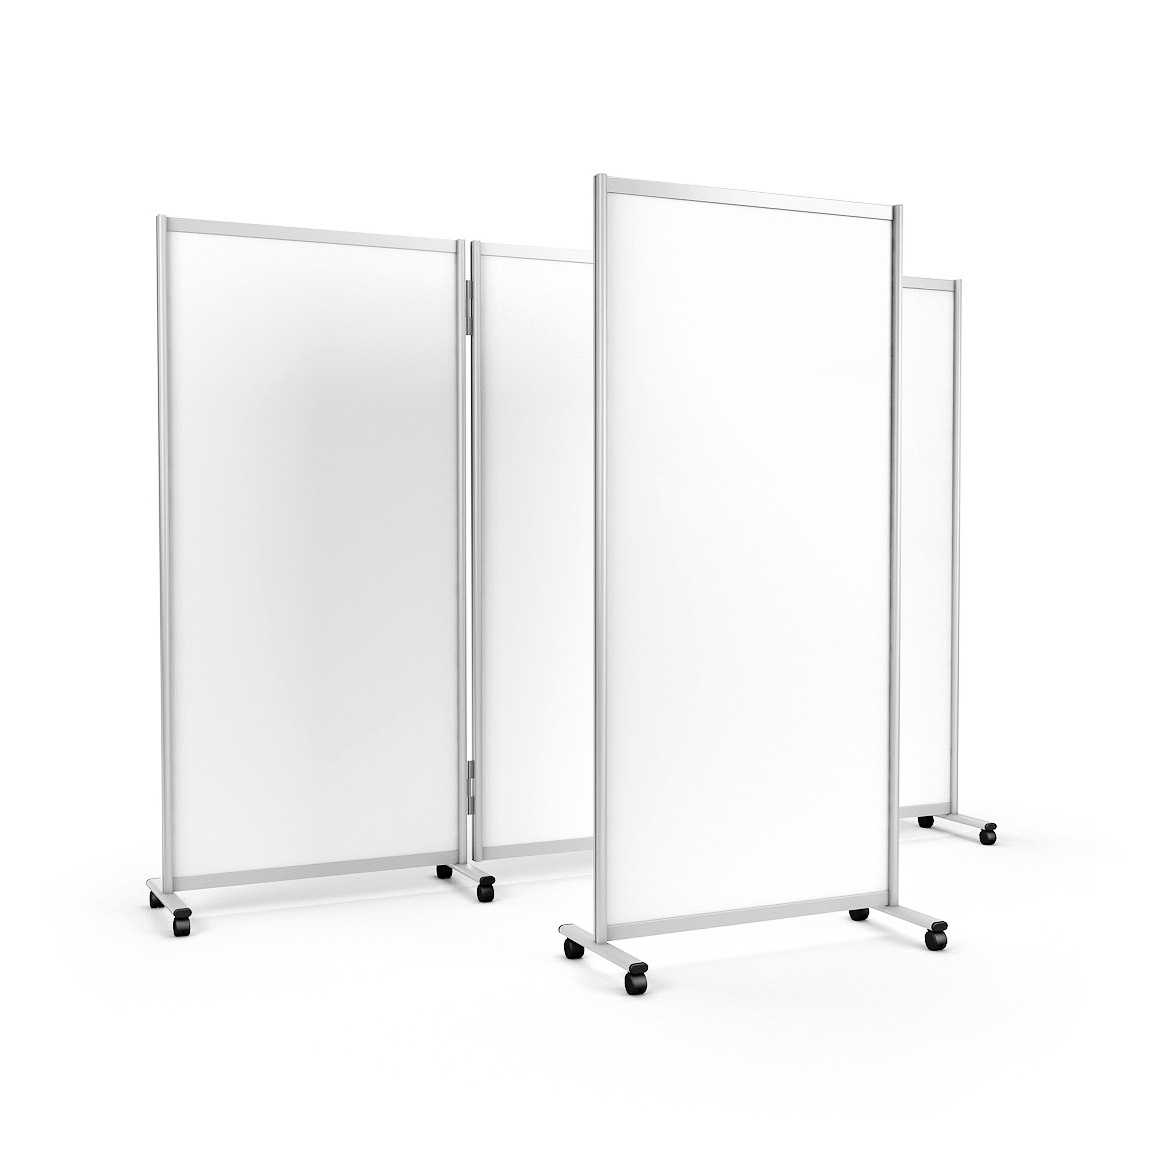 <div>GUARDIAN DIGNITY® Mobile Medical Screens Hospital Ward Have An Opaque White Panel To Enable Private Medical Examinations<br></div>